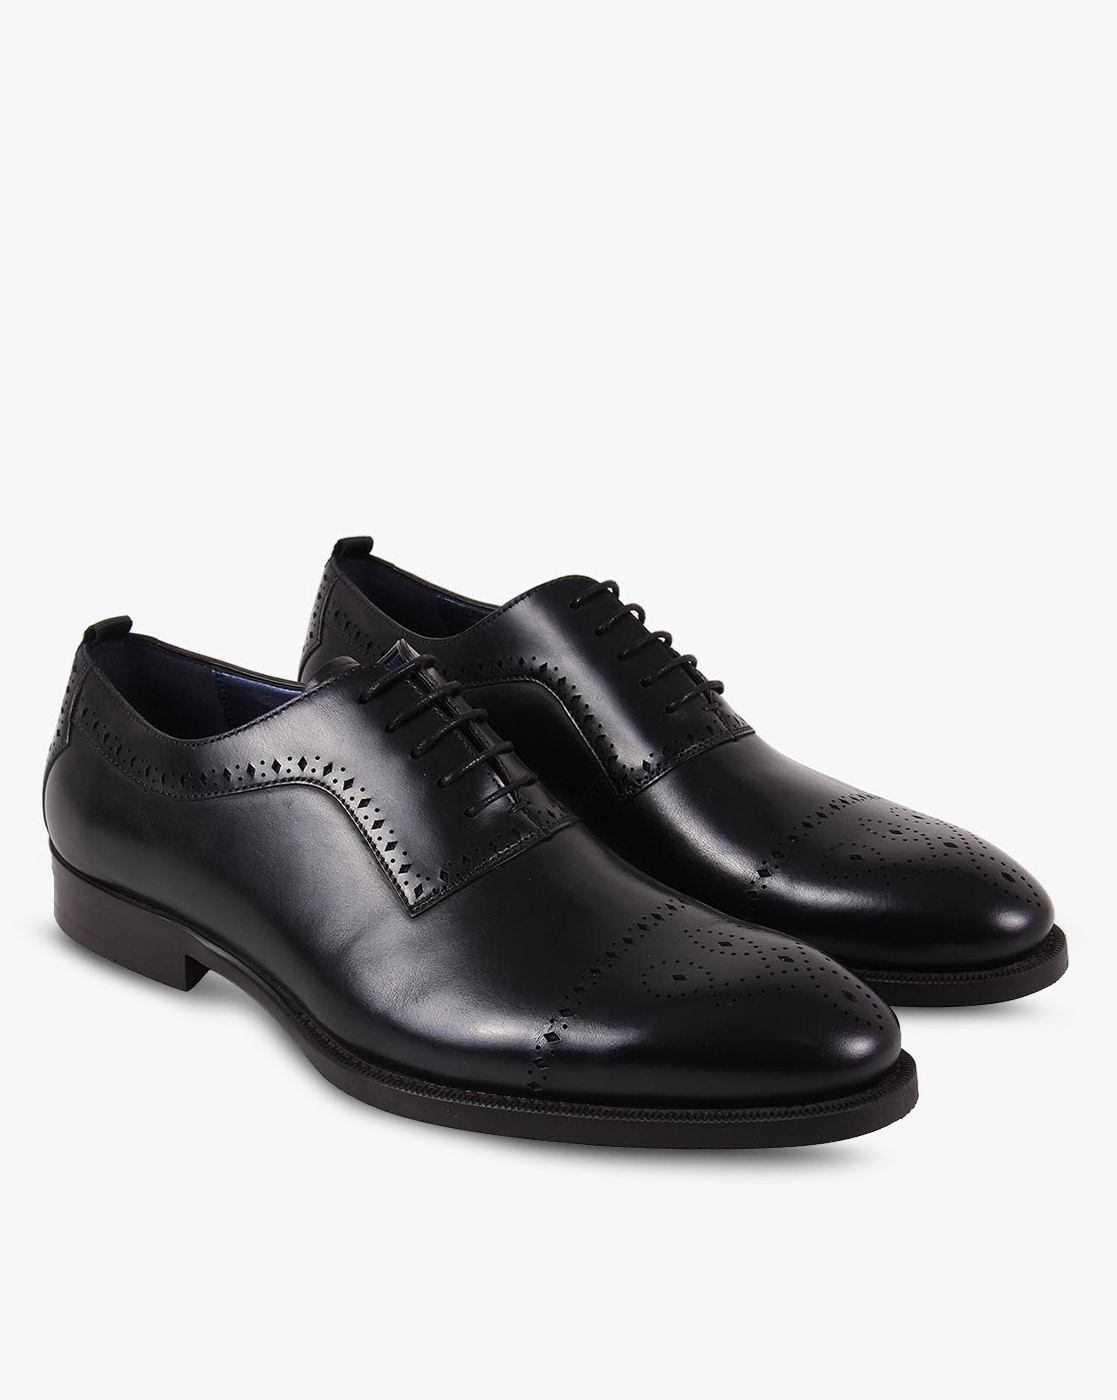 formal oxford shoes